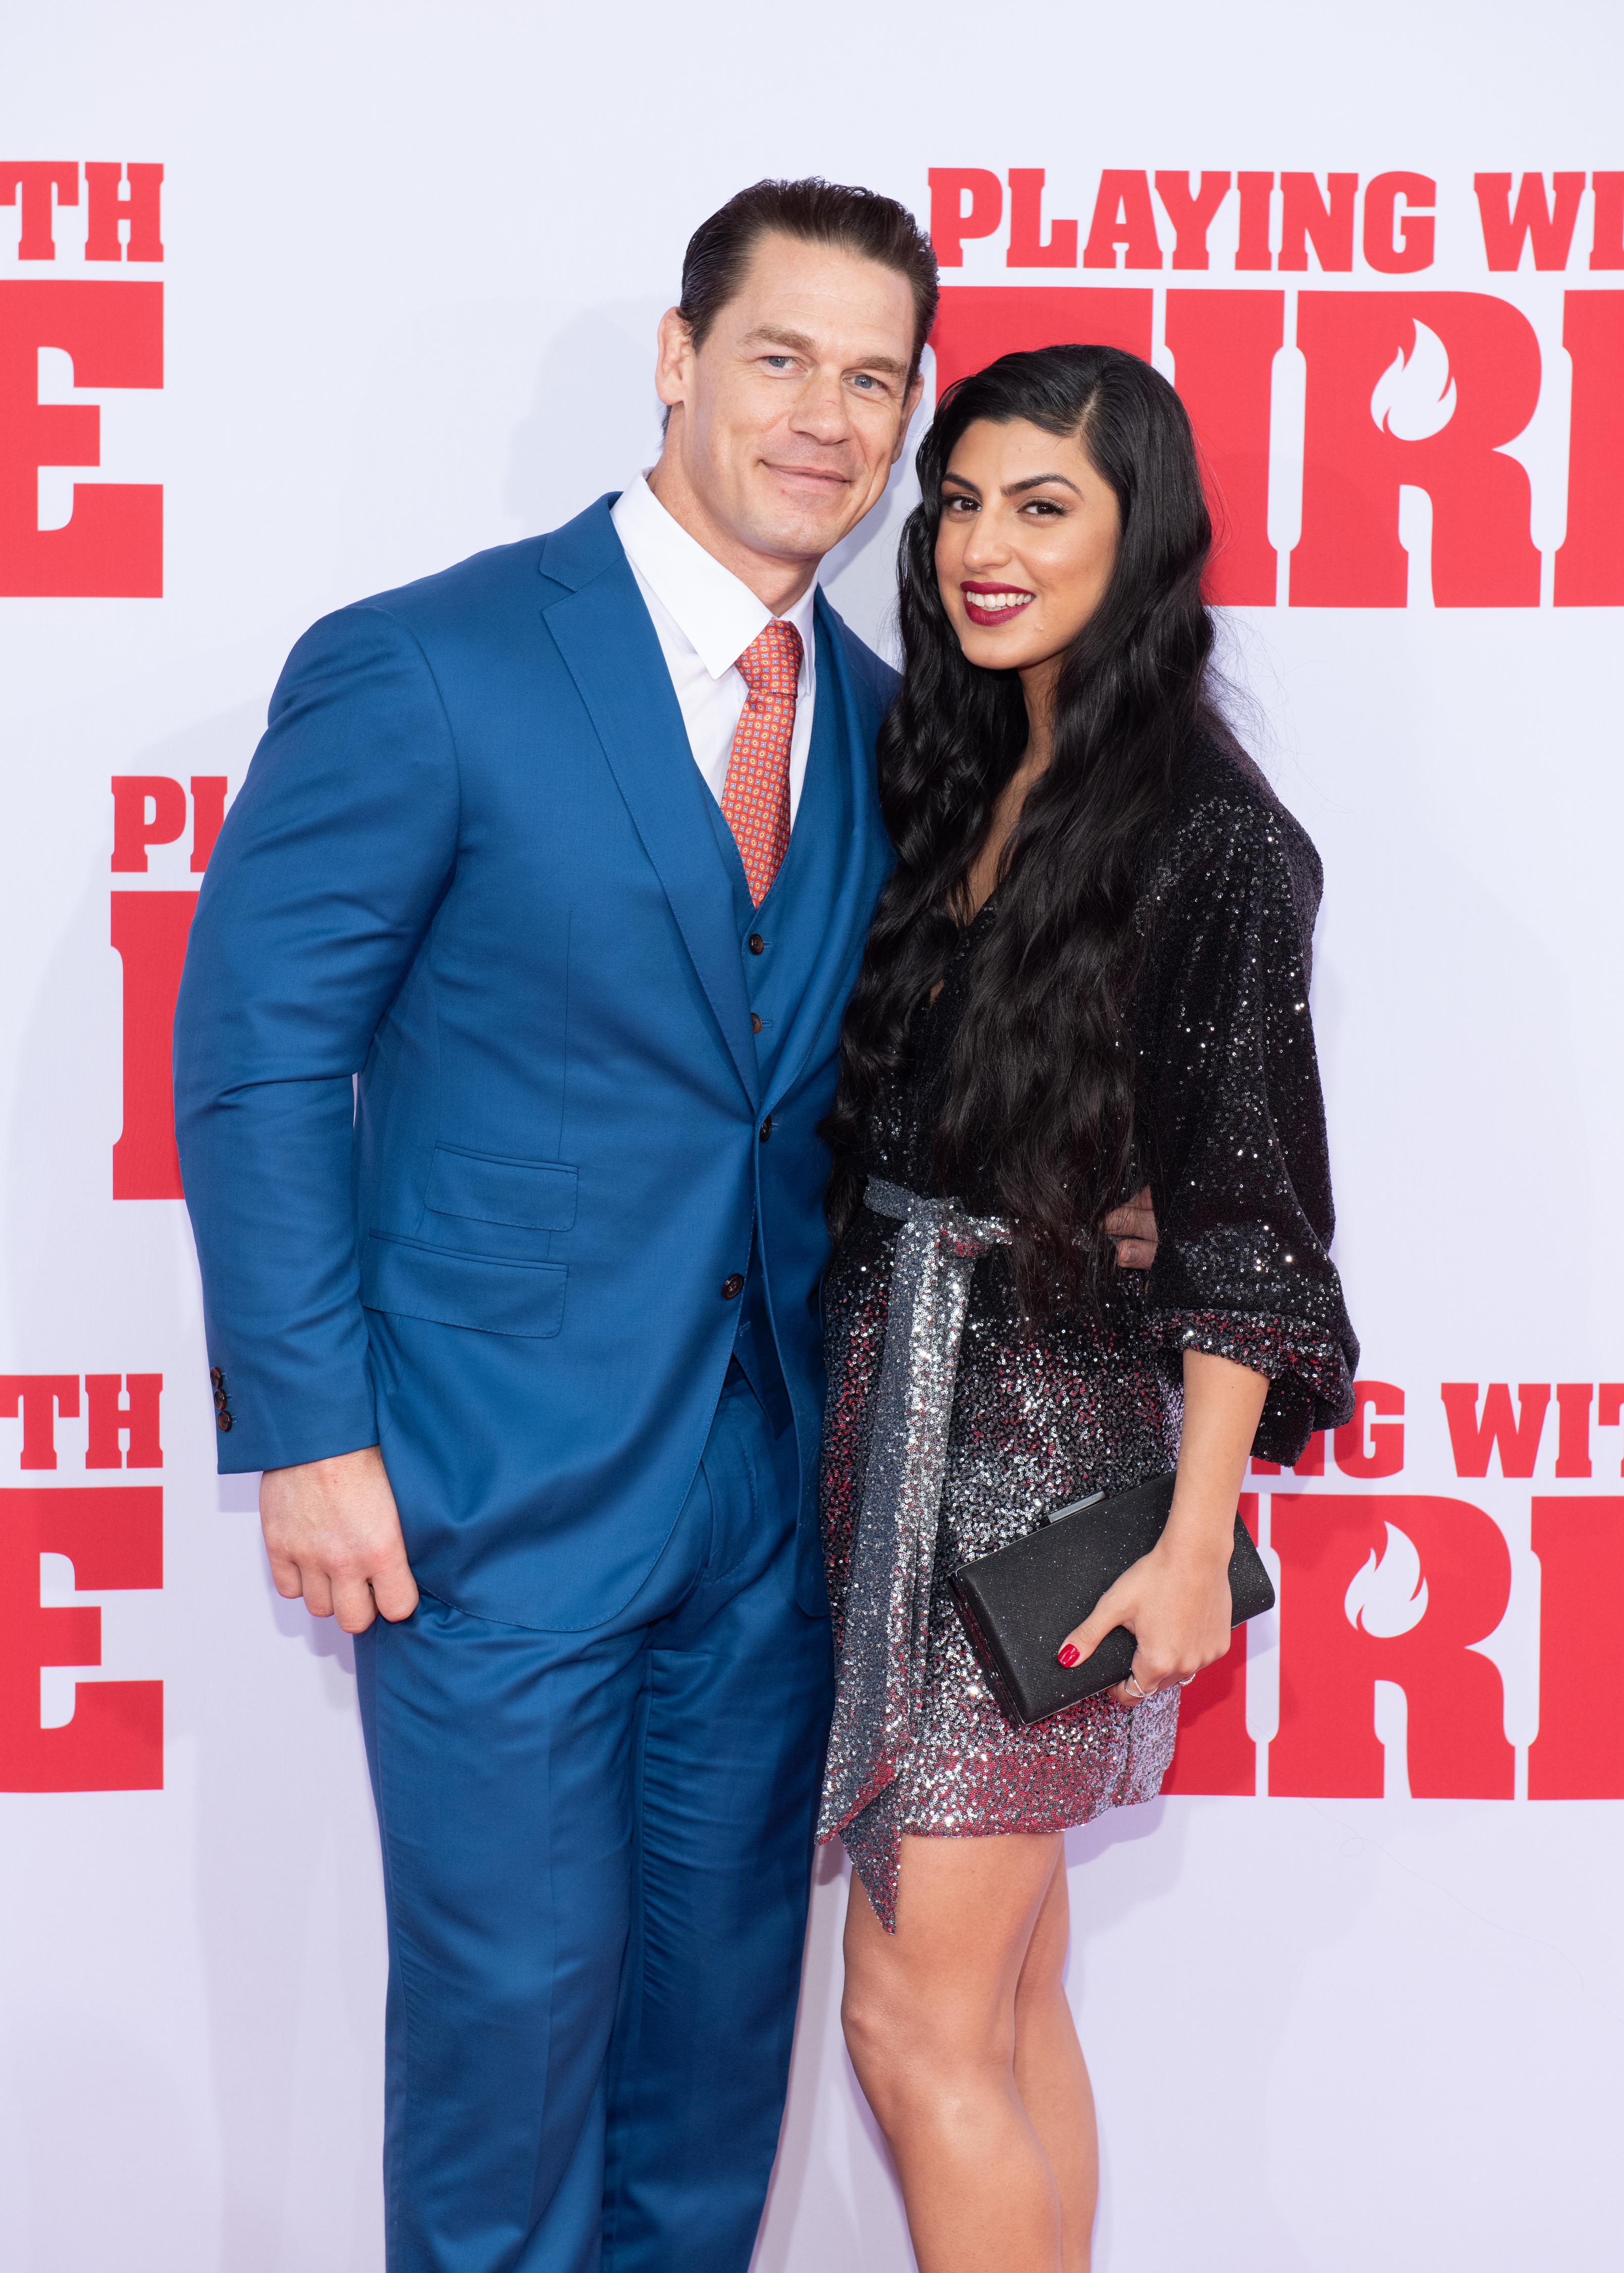 John Cena and Shay Shariatzadeh attend the "Playing With Fire" New York premiere at AMC Lincoln Square Theater on October 26, 2019, in New York City. | Source: Getty Images